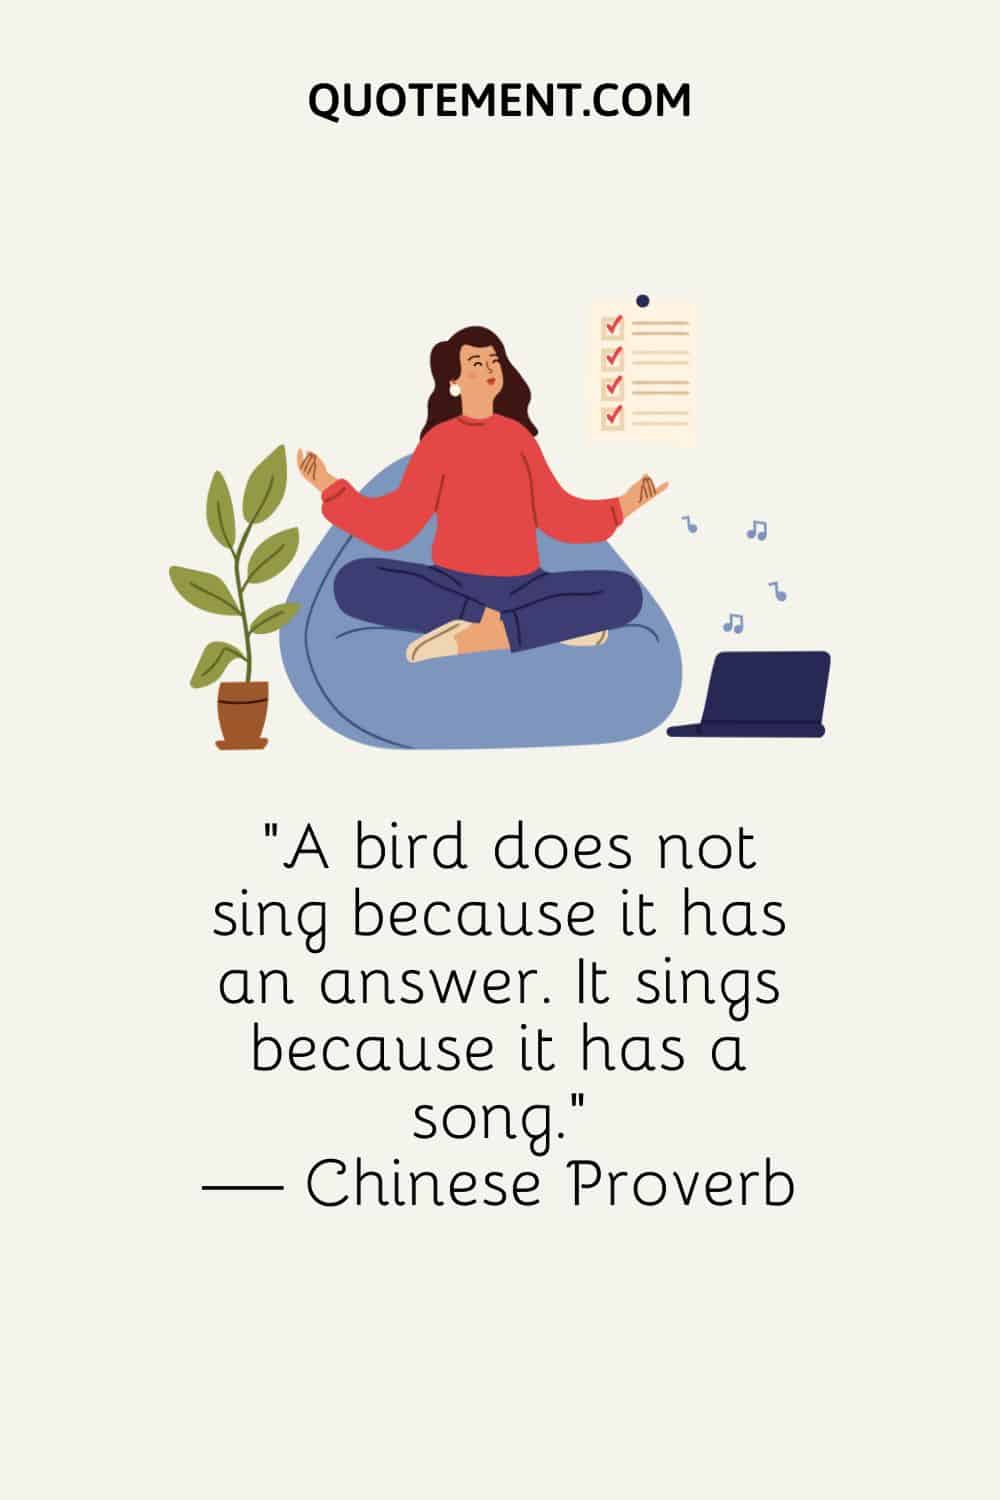 A bird does not sing because it has an answer. It sings because it has a song